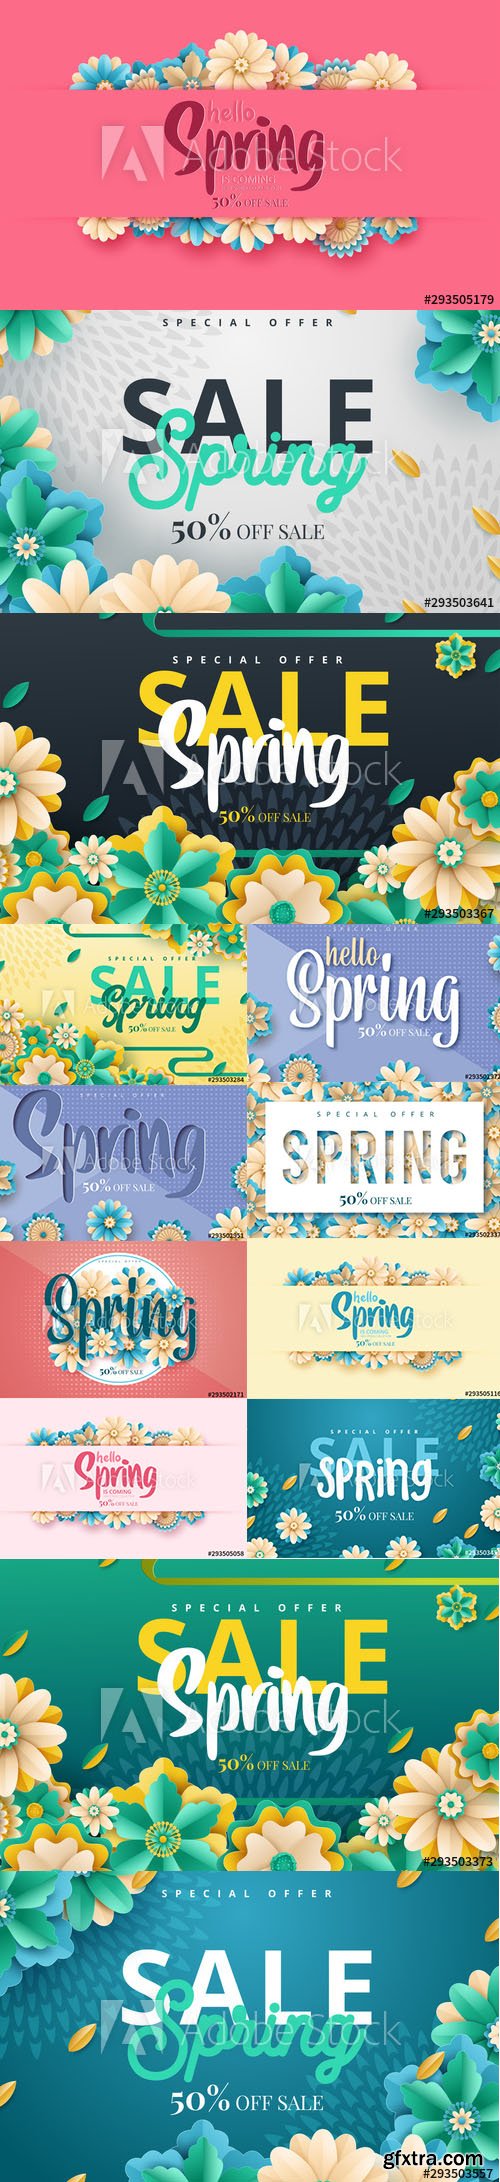 Set of Spring Sale Backgrounds with Flowers vol2